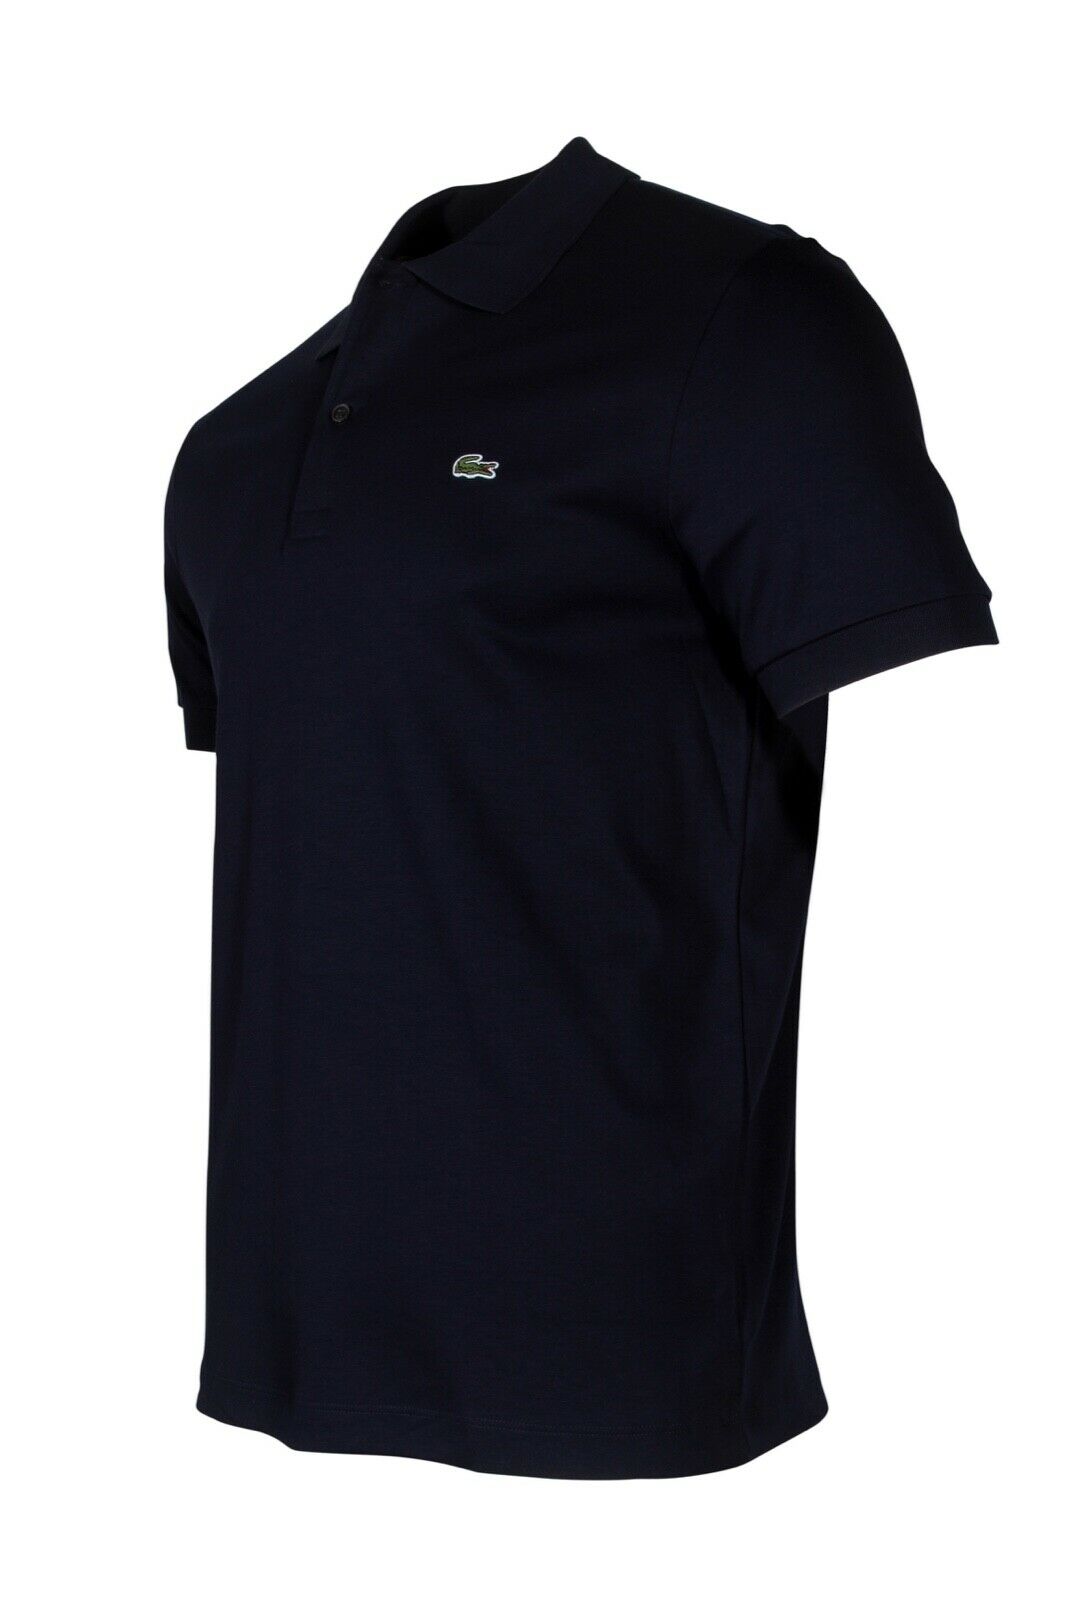 Lacoste Men's Regular Fit Soft Pima Cotton Polo Shirt in Navy Blue DH2050-51 166